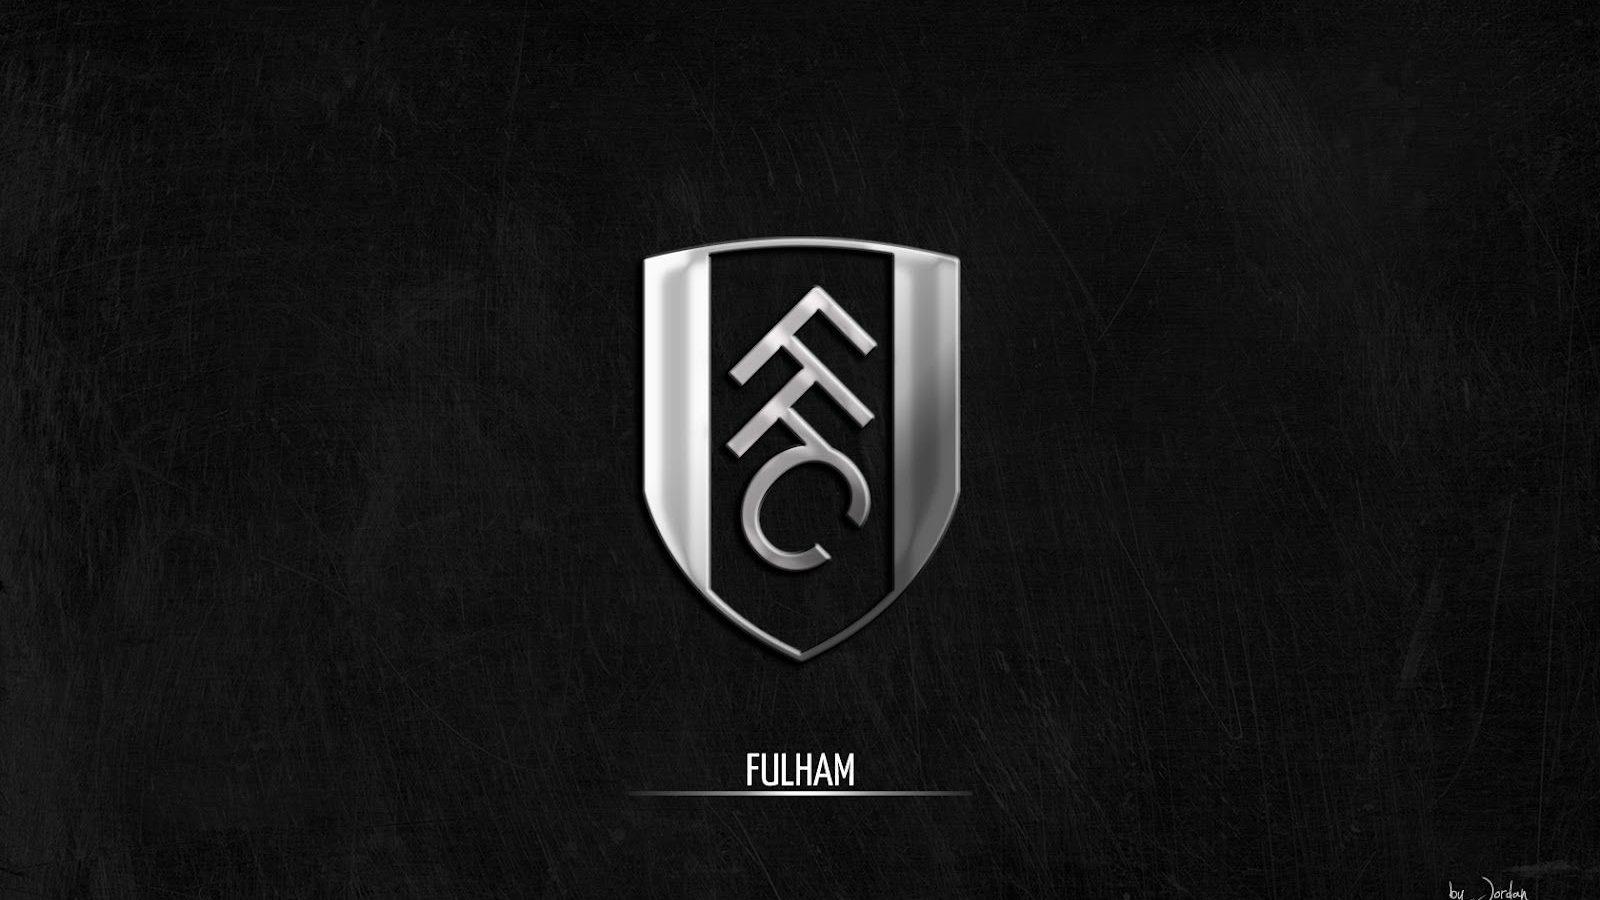 Cool Black And Silver Wallpaper Of Fulham FC's Logo